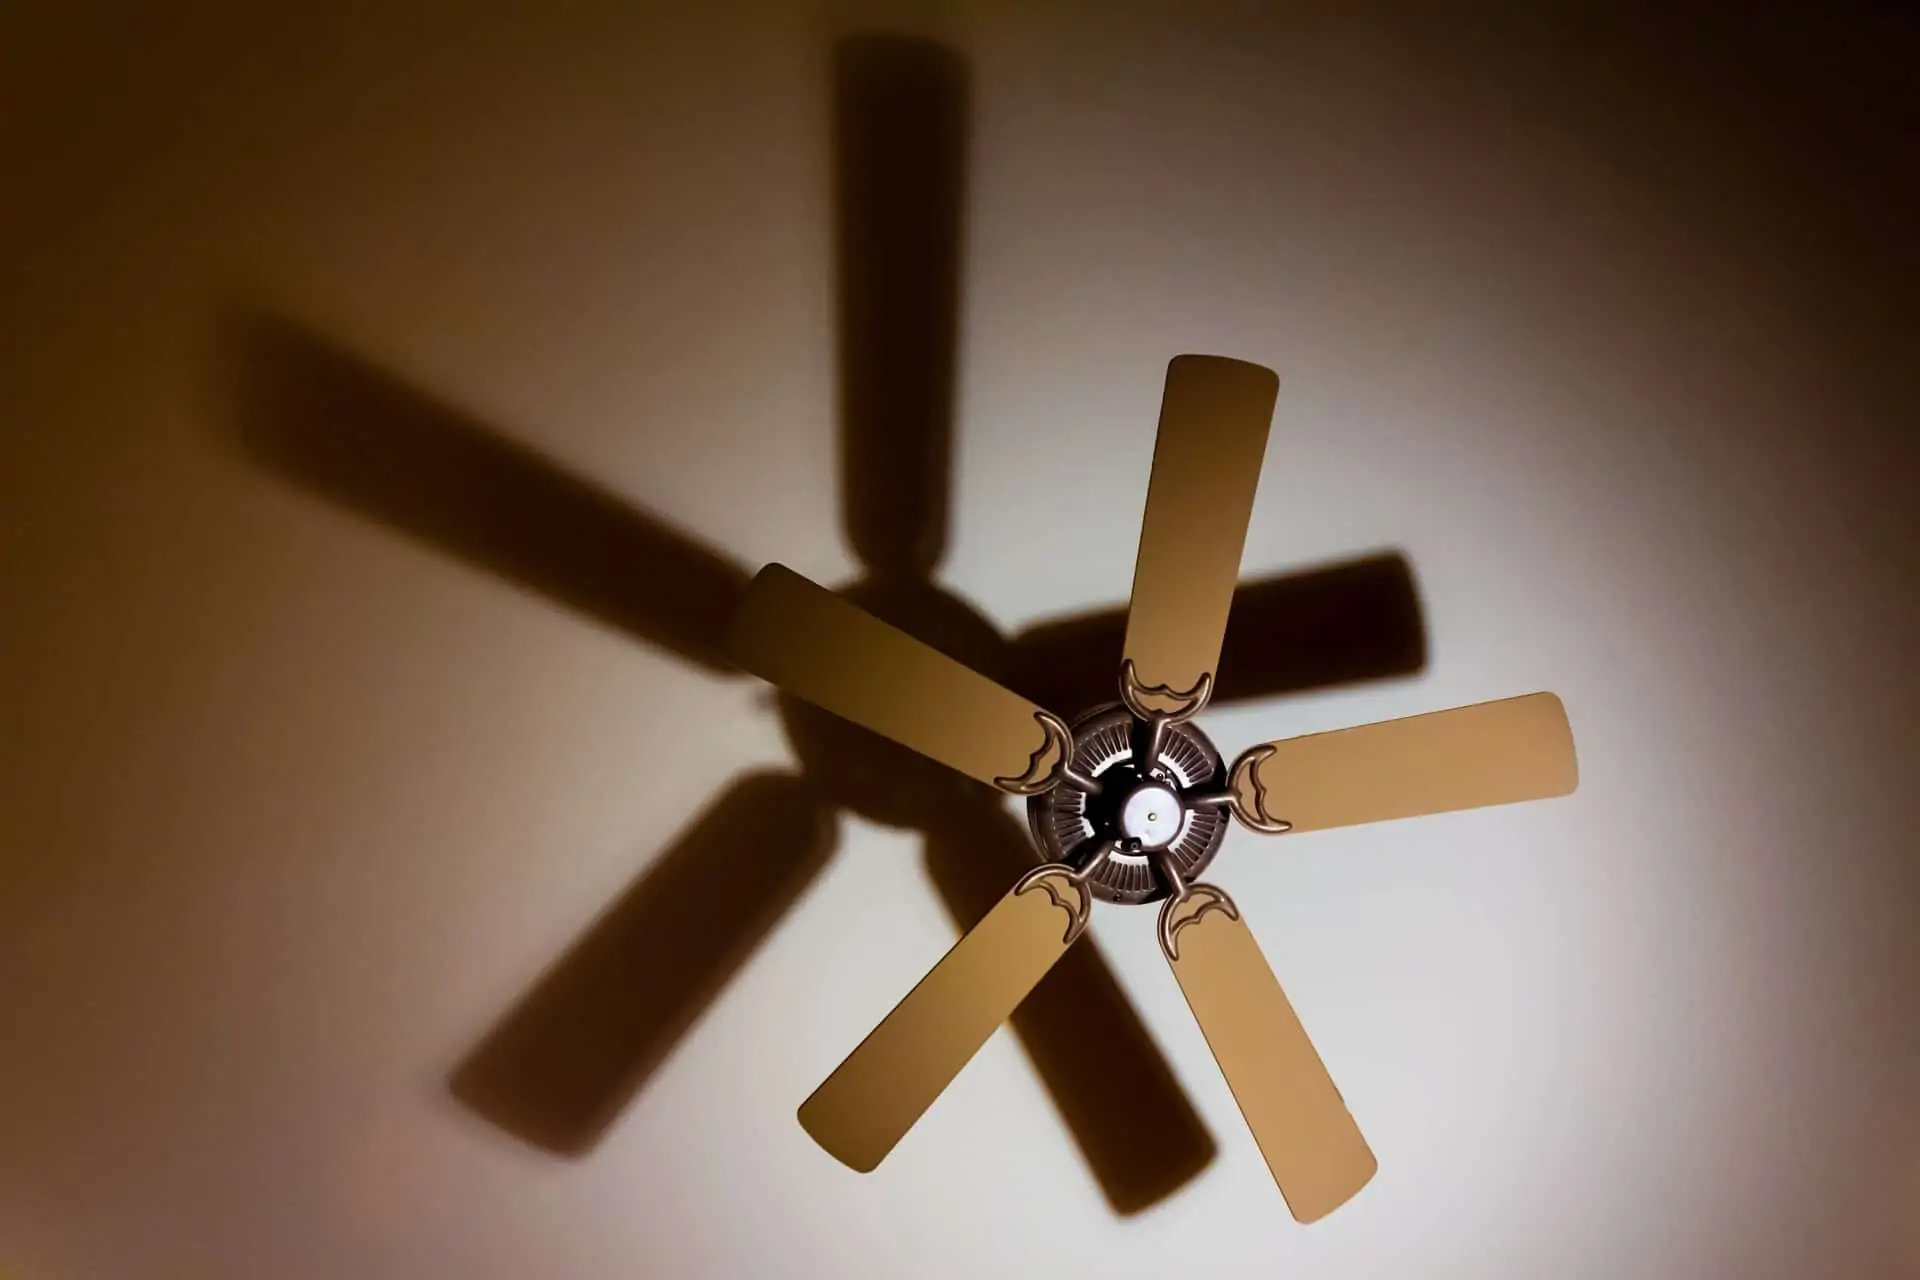 How Much Electricity Does A Fan Use Compared To Air Conditioning?